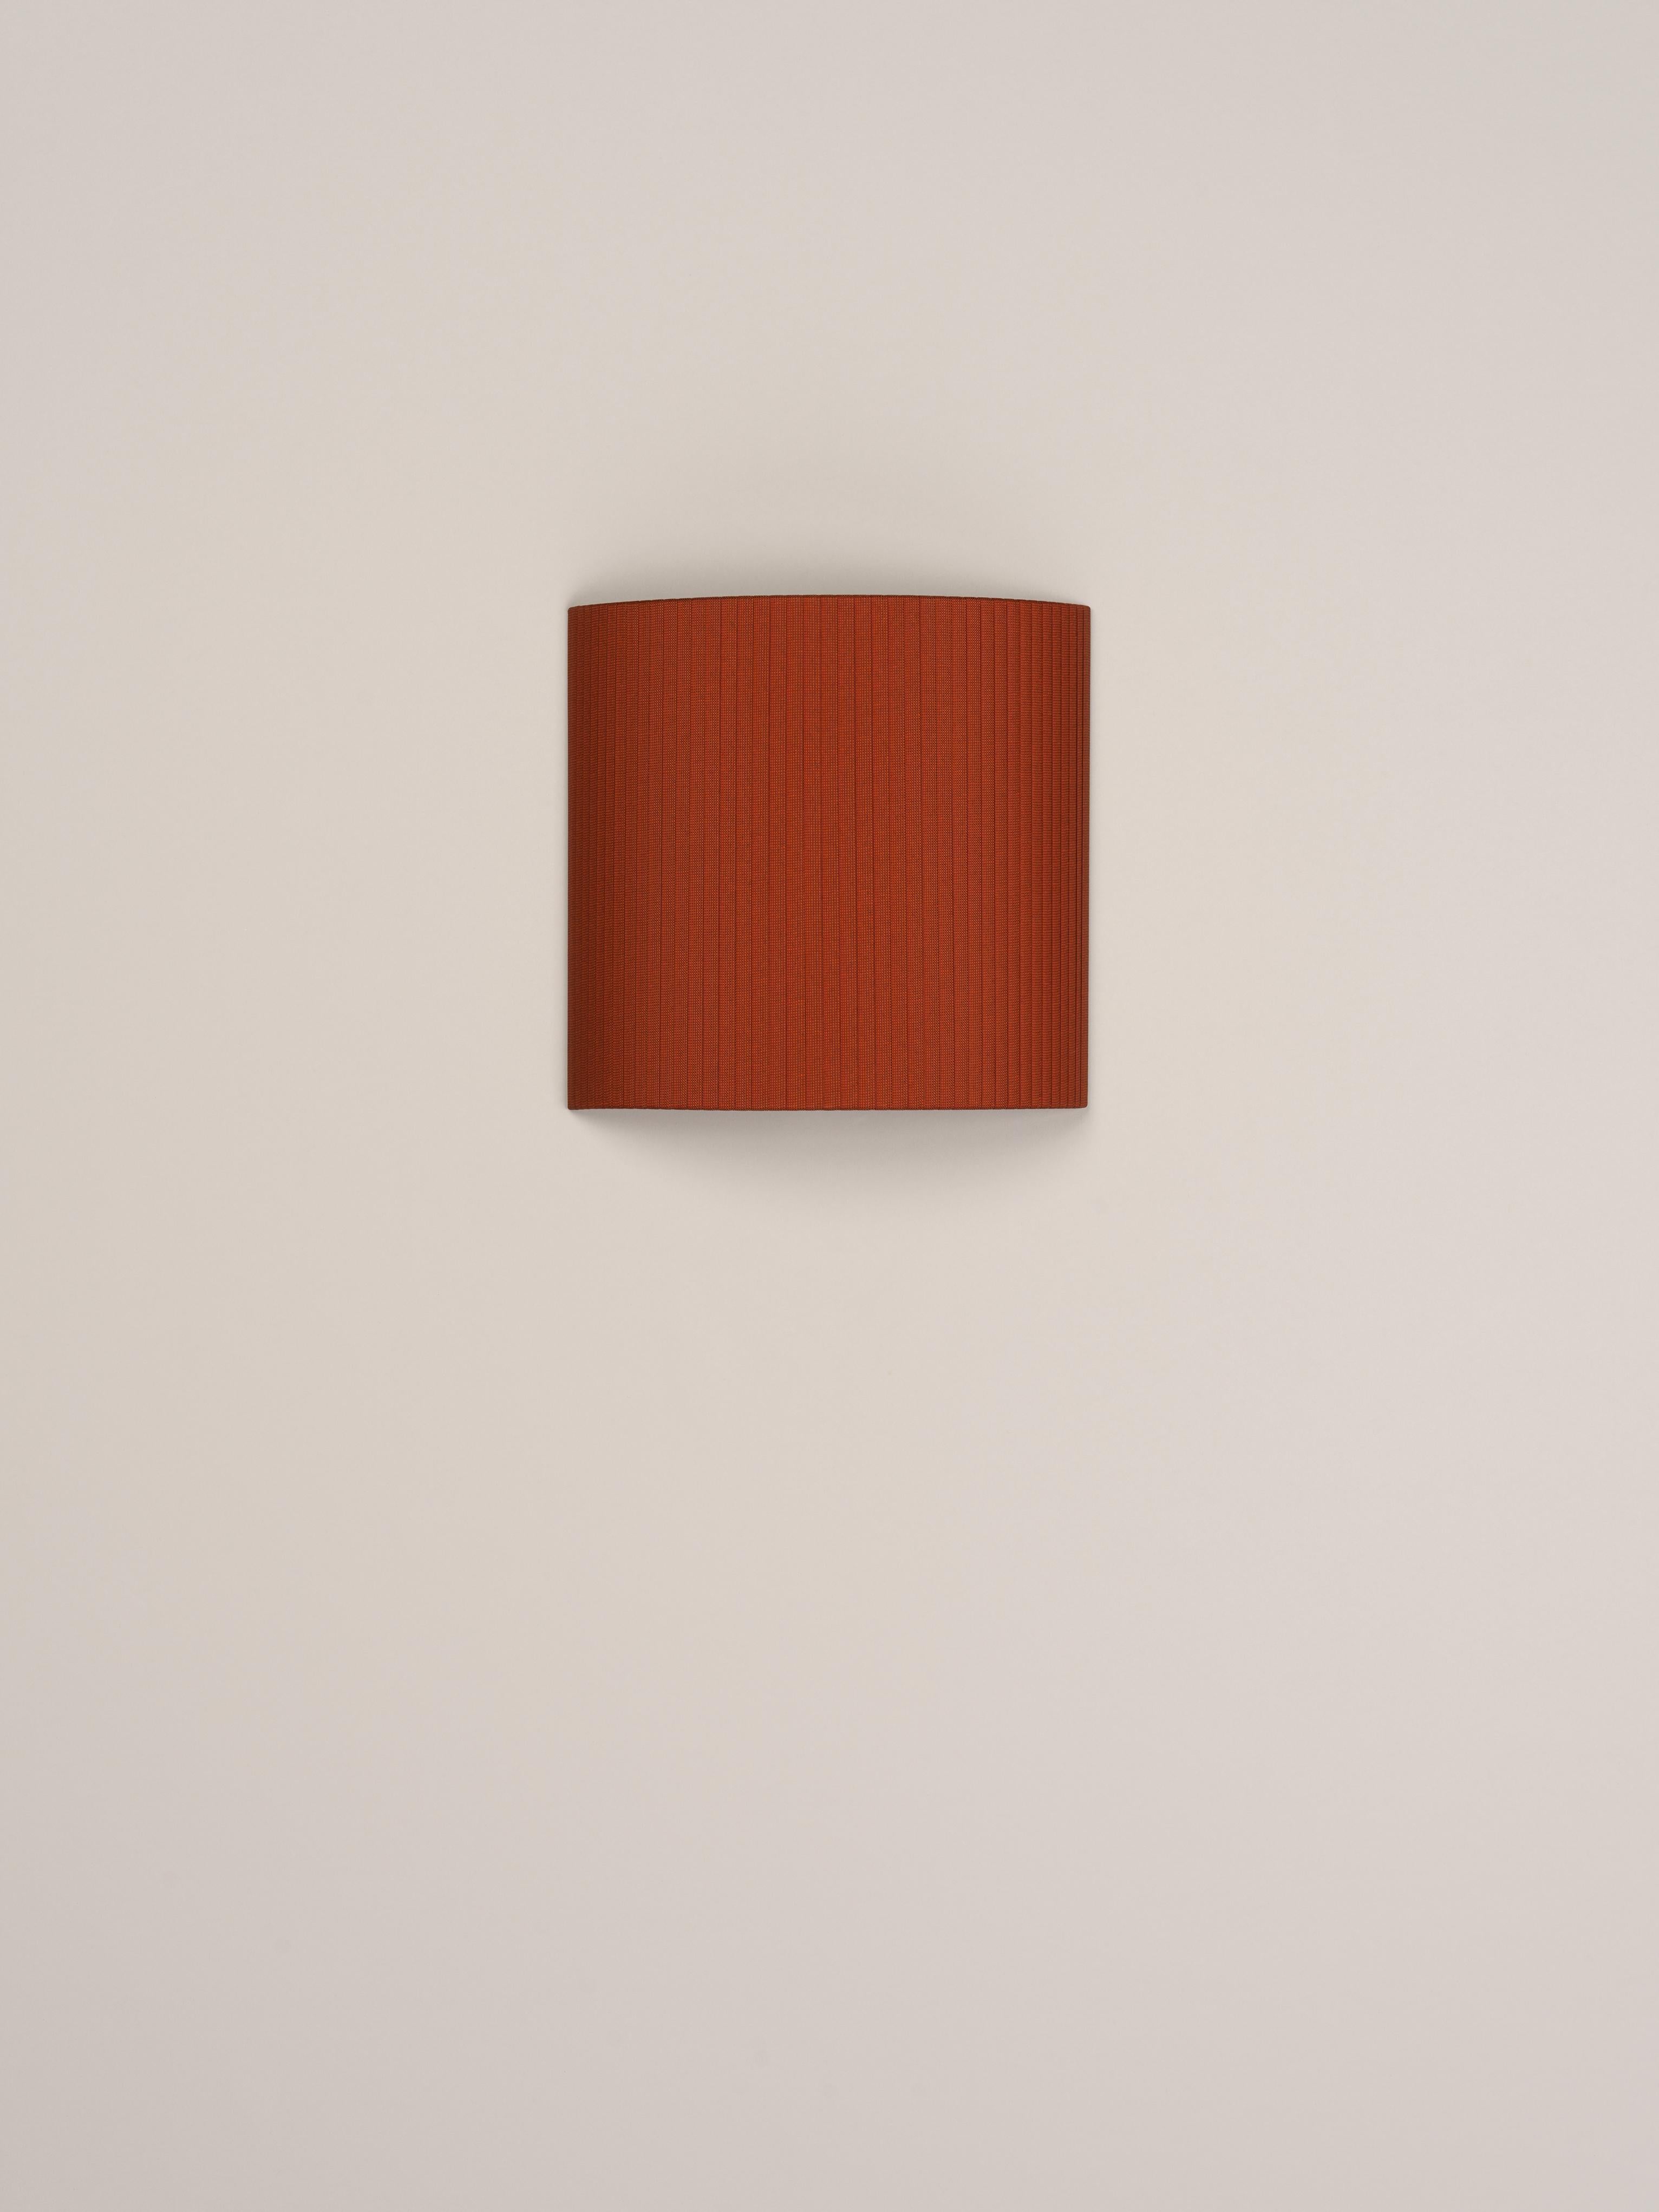 Terracotta Comodín Cuadrado wall lamp by Santa & Cole
Dimensions: D 31 x W 13 x H 30 cm
Materials: Metal, ribbon.

This minimalist wall lamp humanises neutral spaces with its colourful and functional sobriety. The shade is fondly hand-ribboned,